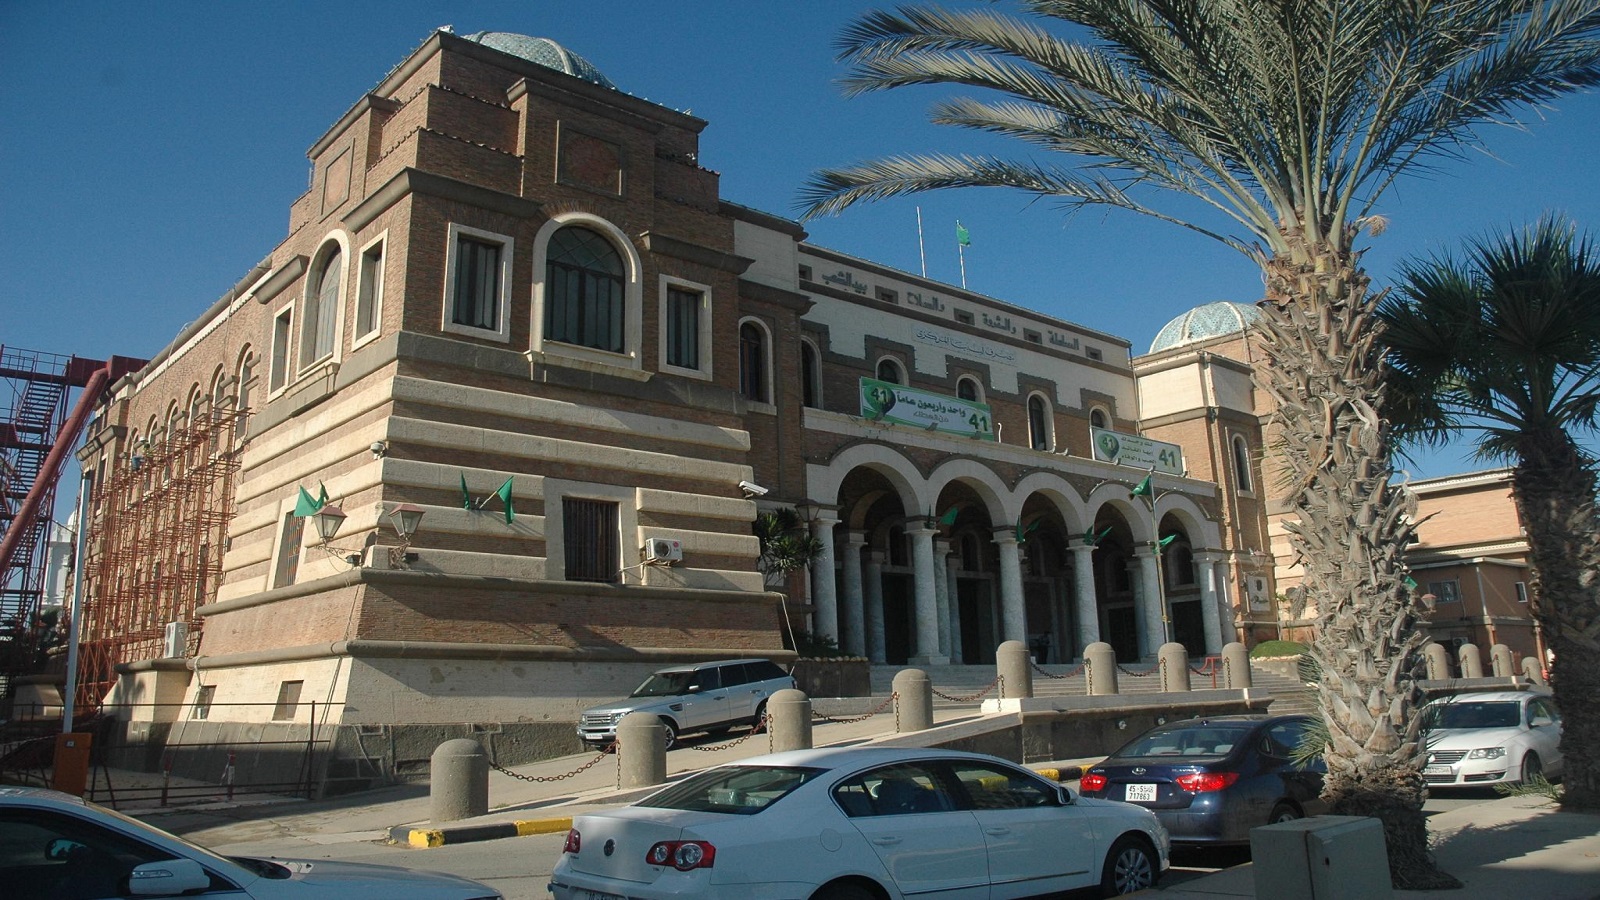 Libya’s Central Bank Reunifies After Nearly a Decade of Division